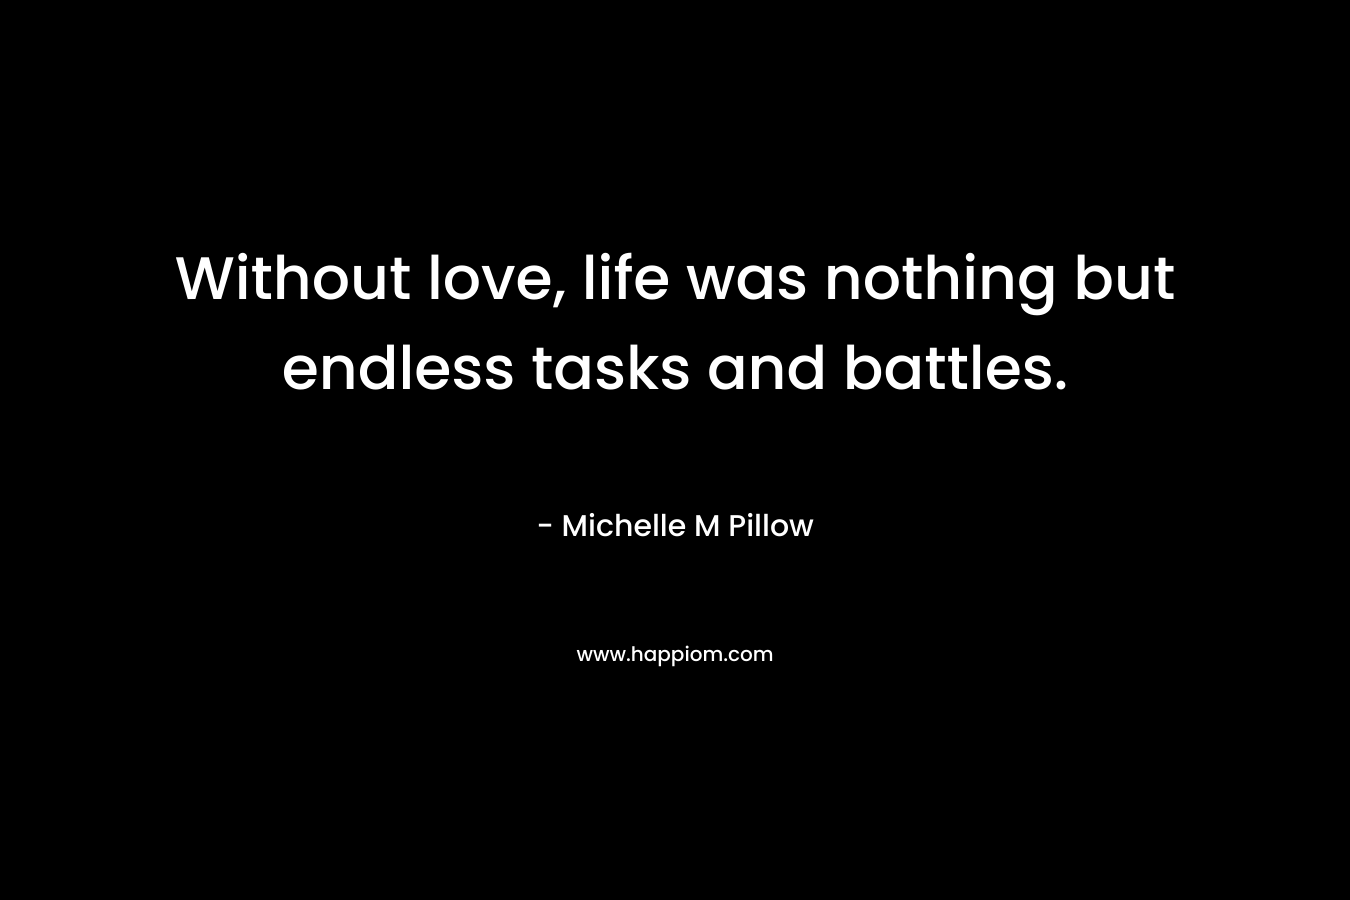 Without love, life was nothing but endless tasks and battles.